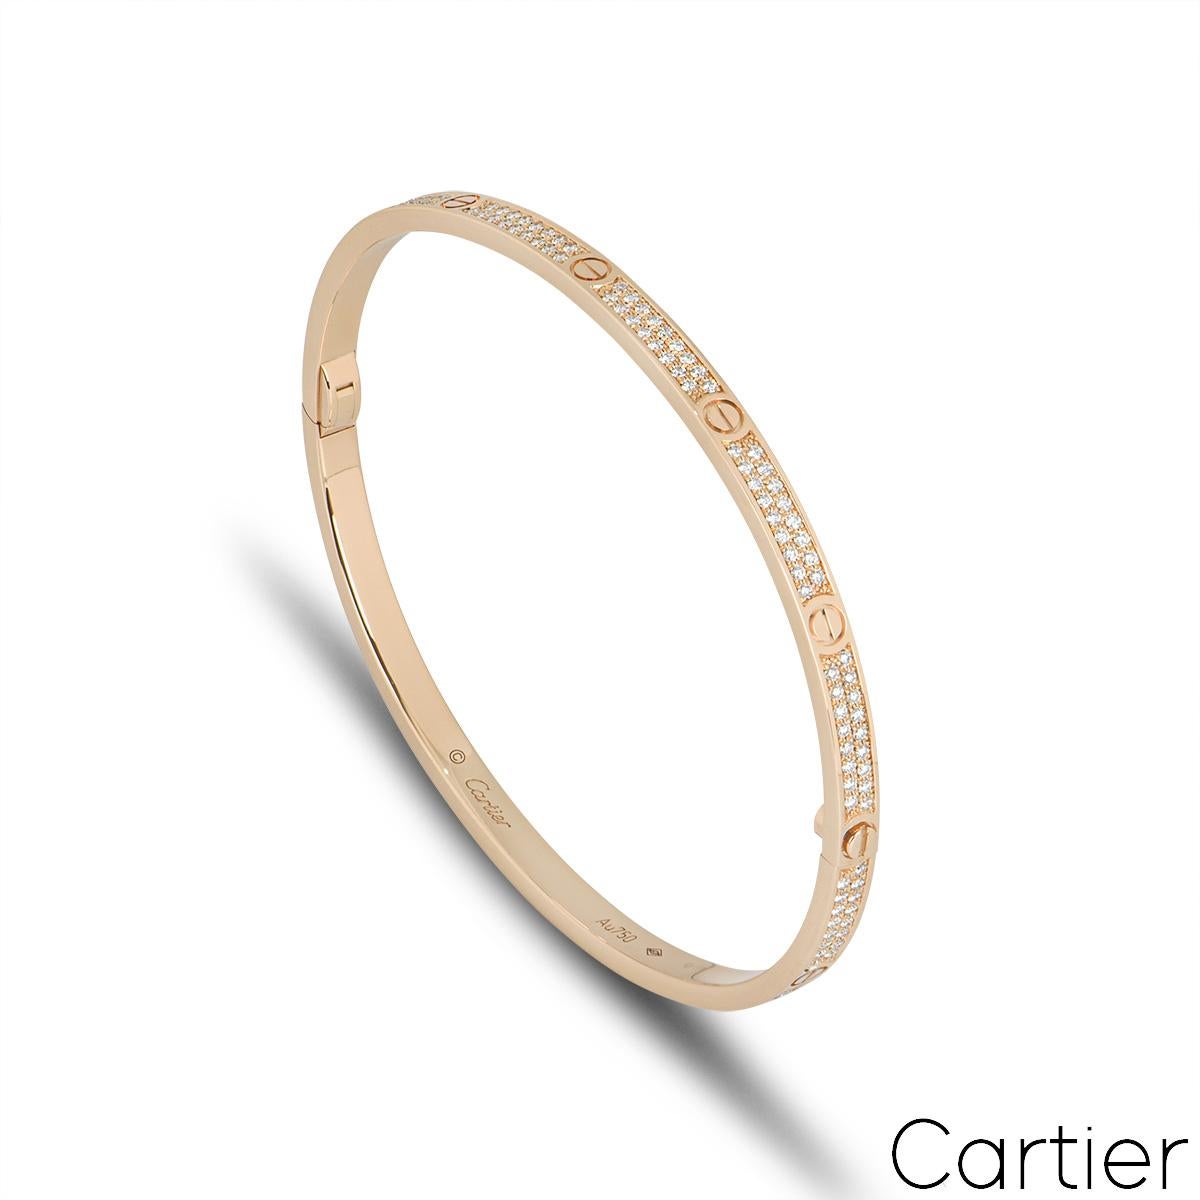 A sparkly 18k rose gold diamond Cartier bracelet from the Love collection. The bracelet comprises of the iconic screw motifs around the outer edge complemented with 177 round brilliant cut pave set diamonds in between. The diamonds have a total